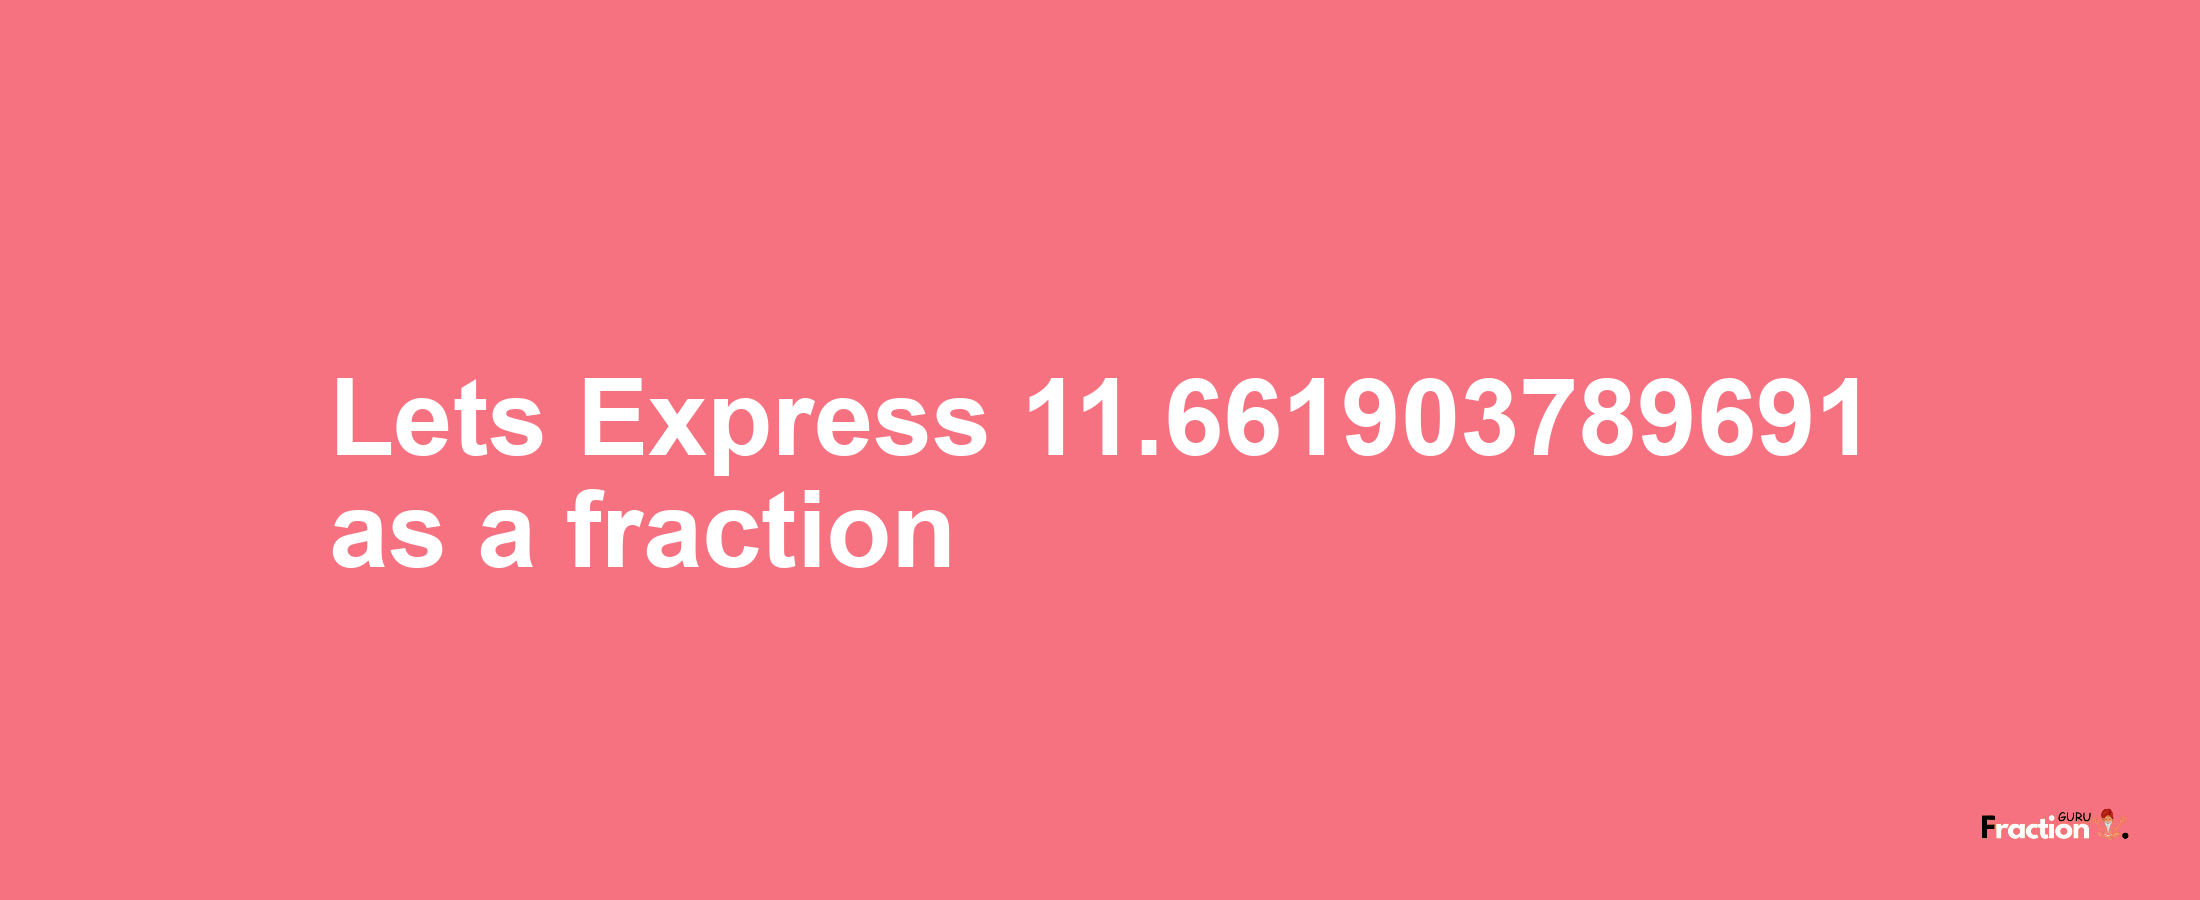 Lets Express 11.661903789691 as afraction